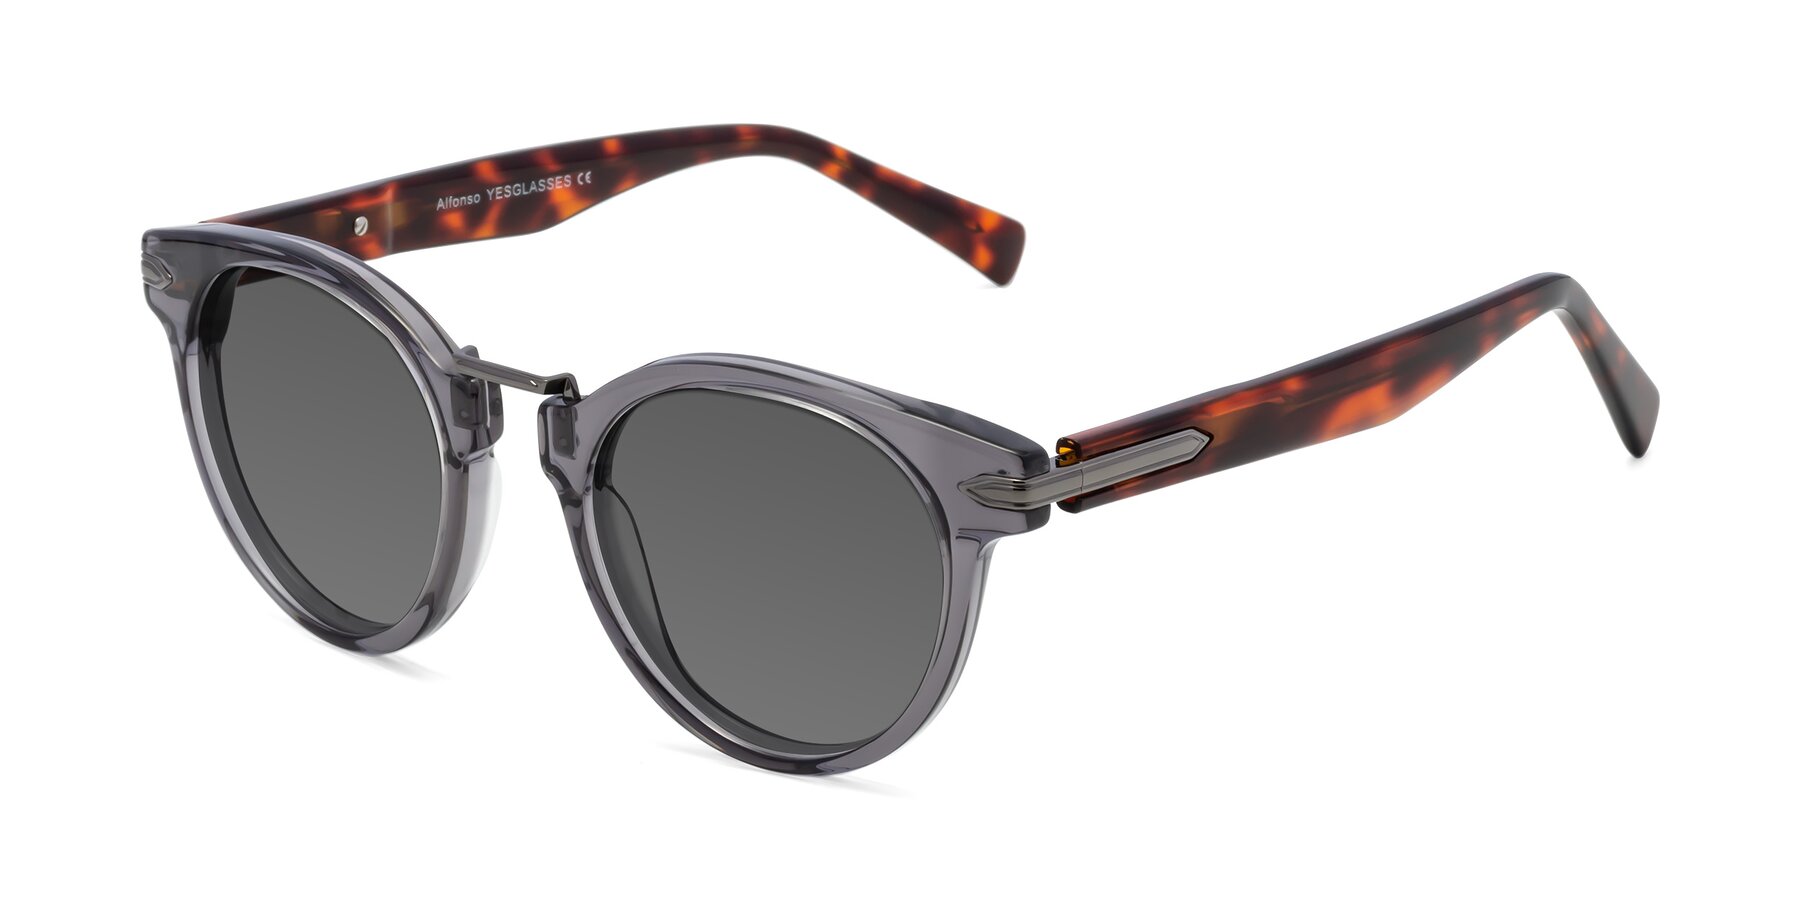 Angle of Alfonso in Gray /Tortoise with Medium Gray Tinted Lenses